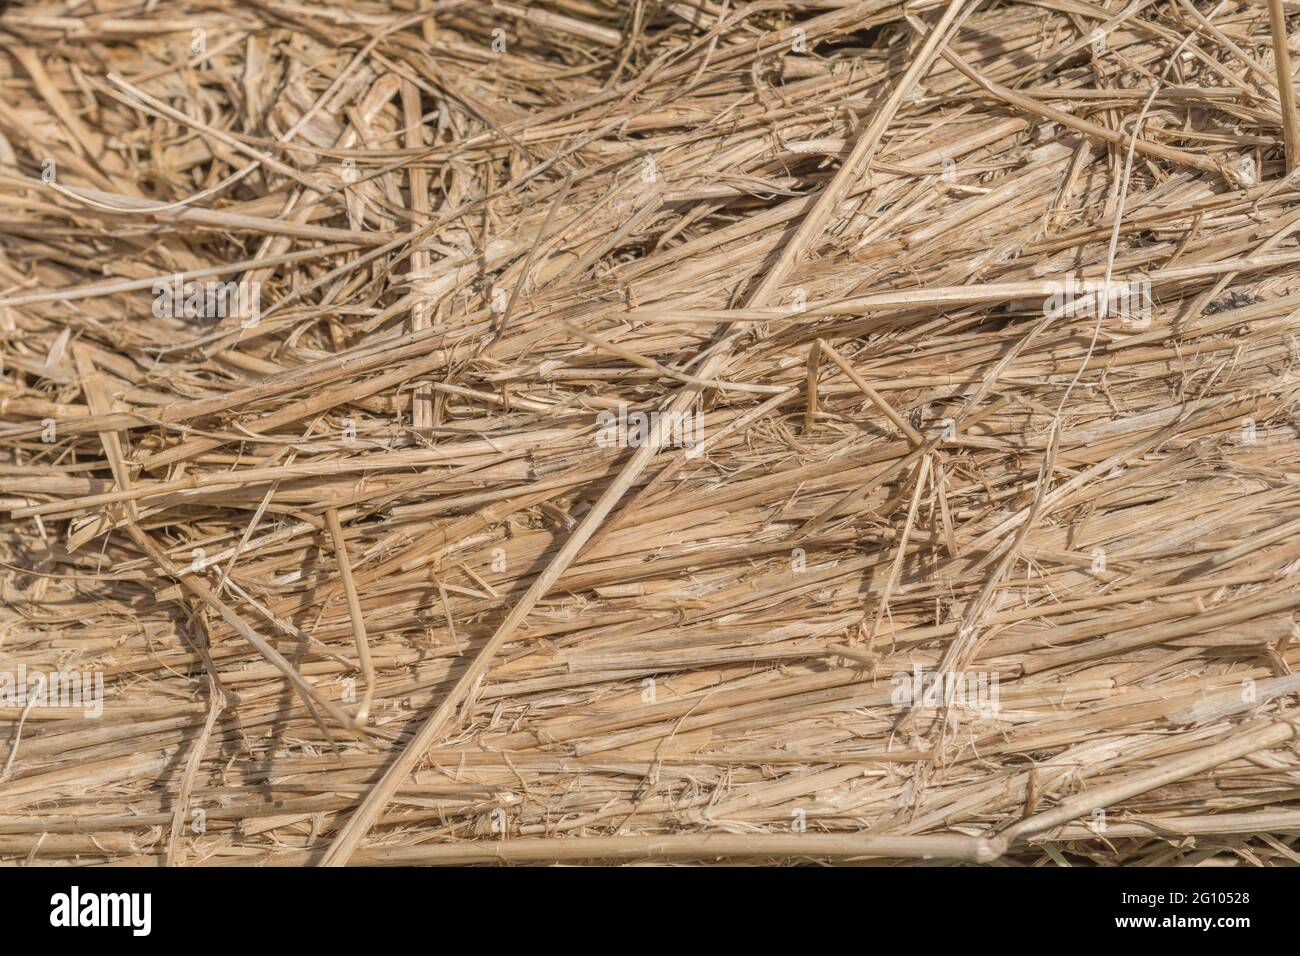 Close up straw texture of round hay bale that has been broken open. Shows layers of compressed straw. For animal feed, agriculture and farming UK. Stock Photo